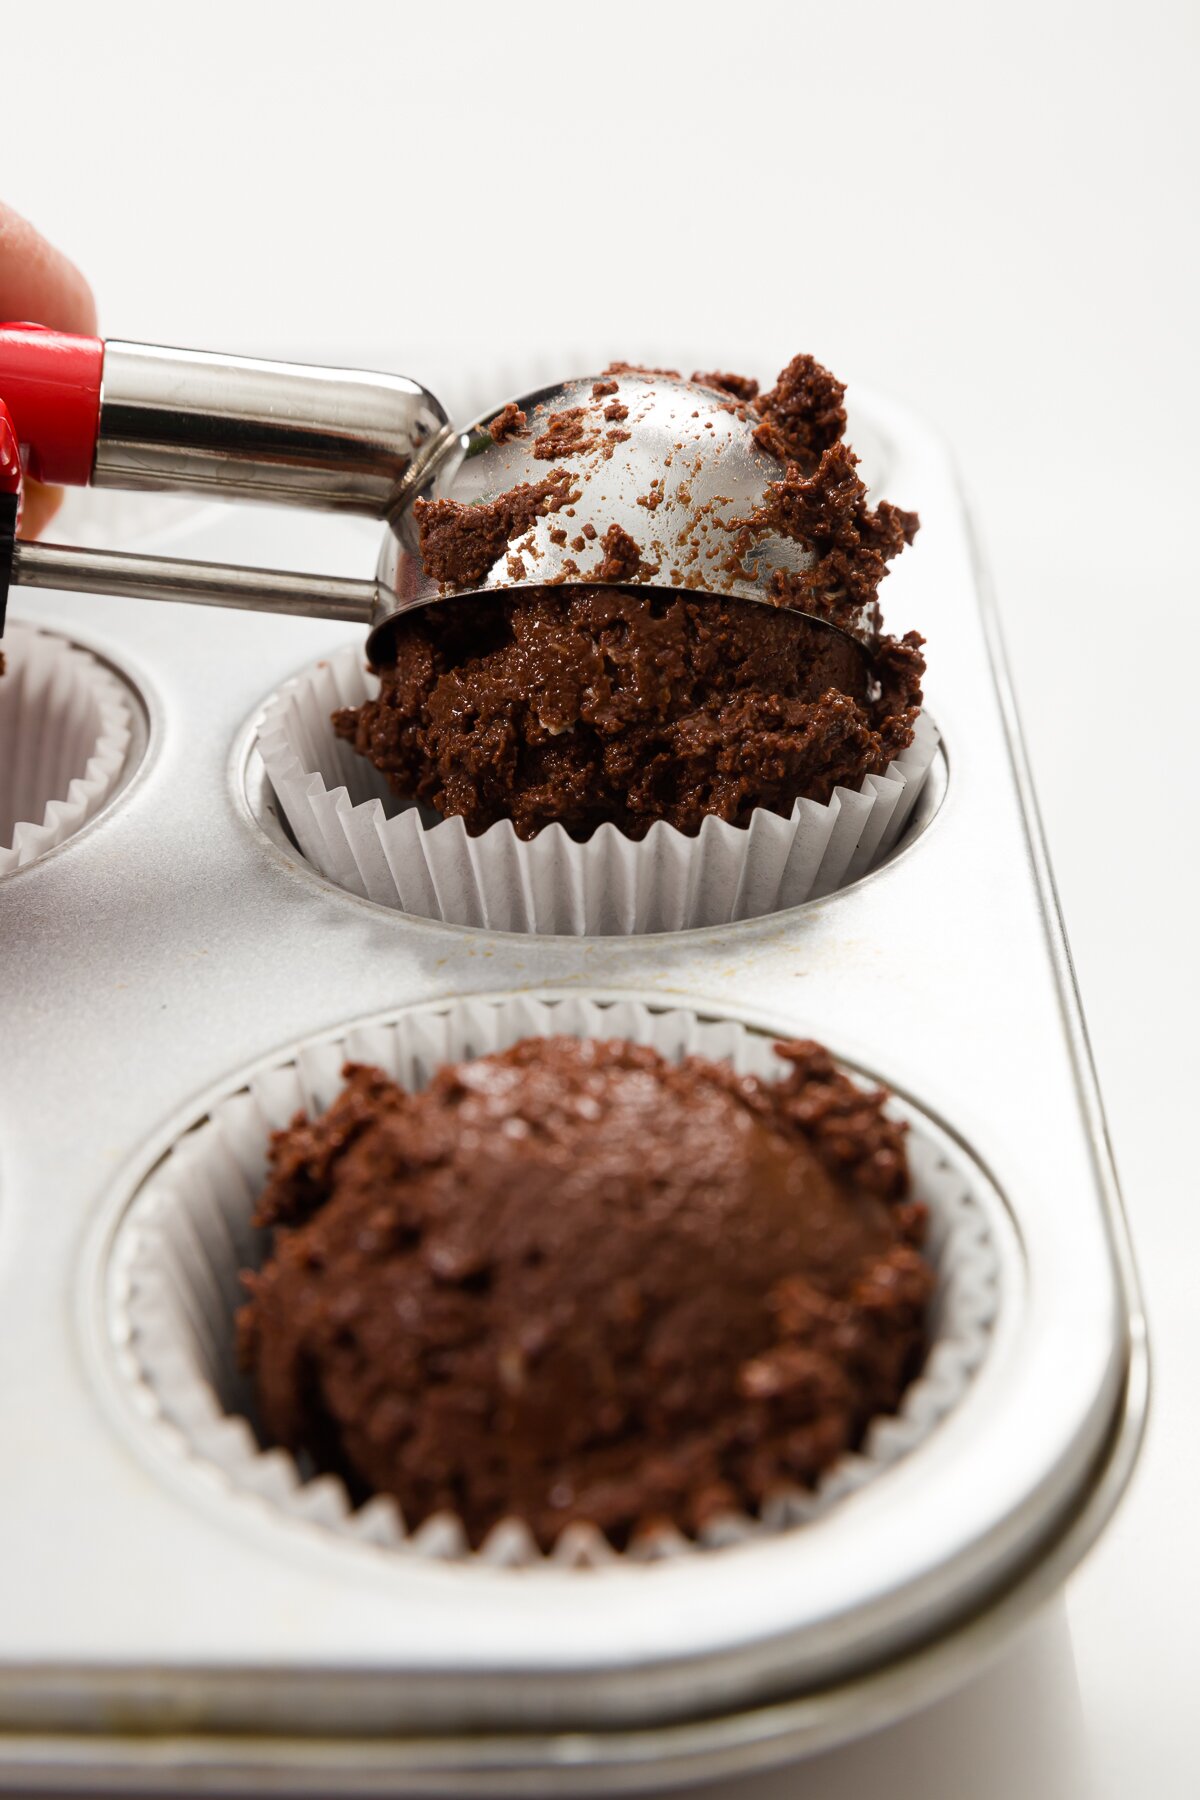 Filling cupcake liner with an ice cream scoop